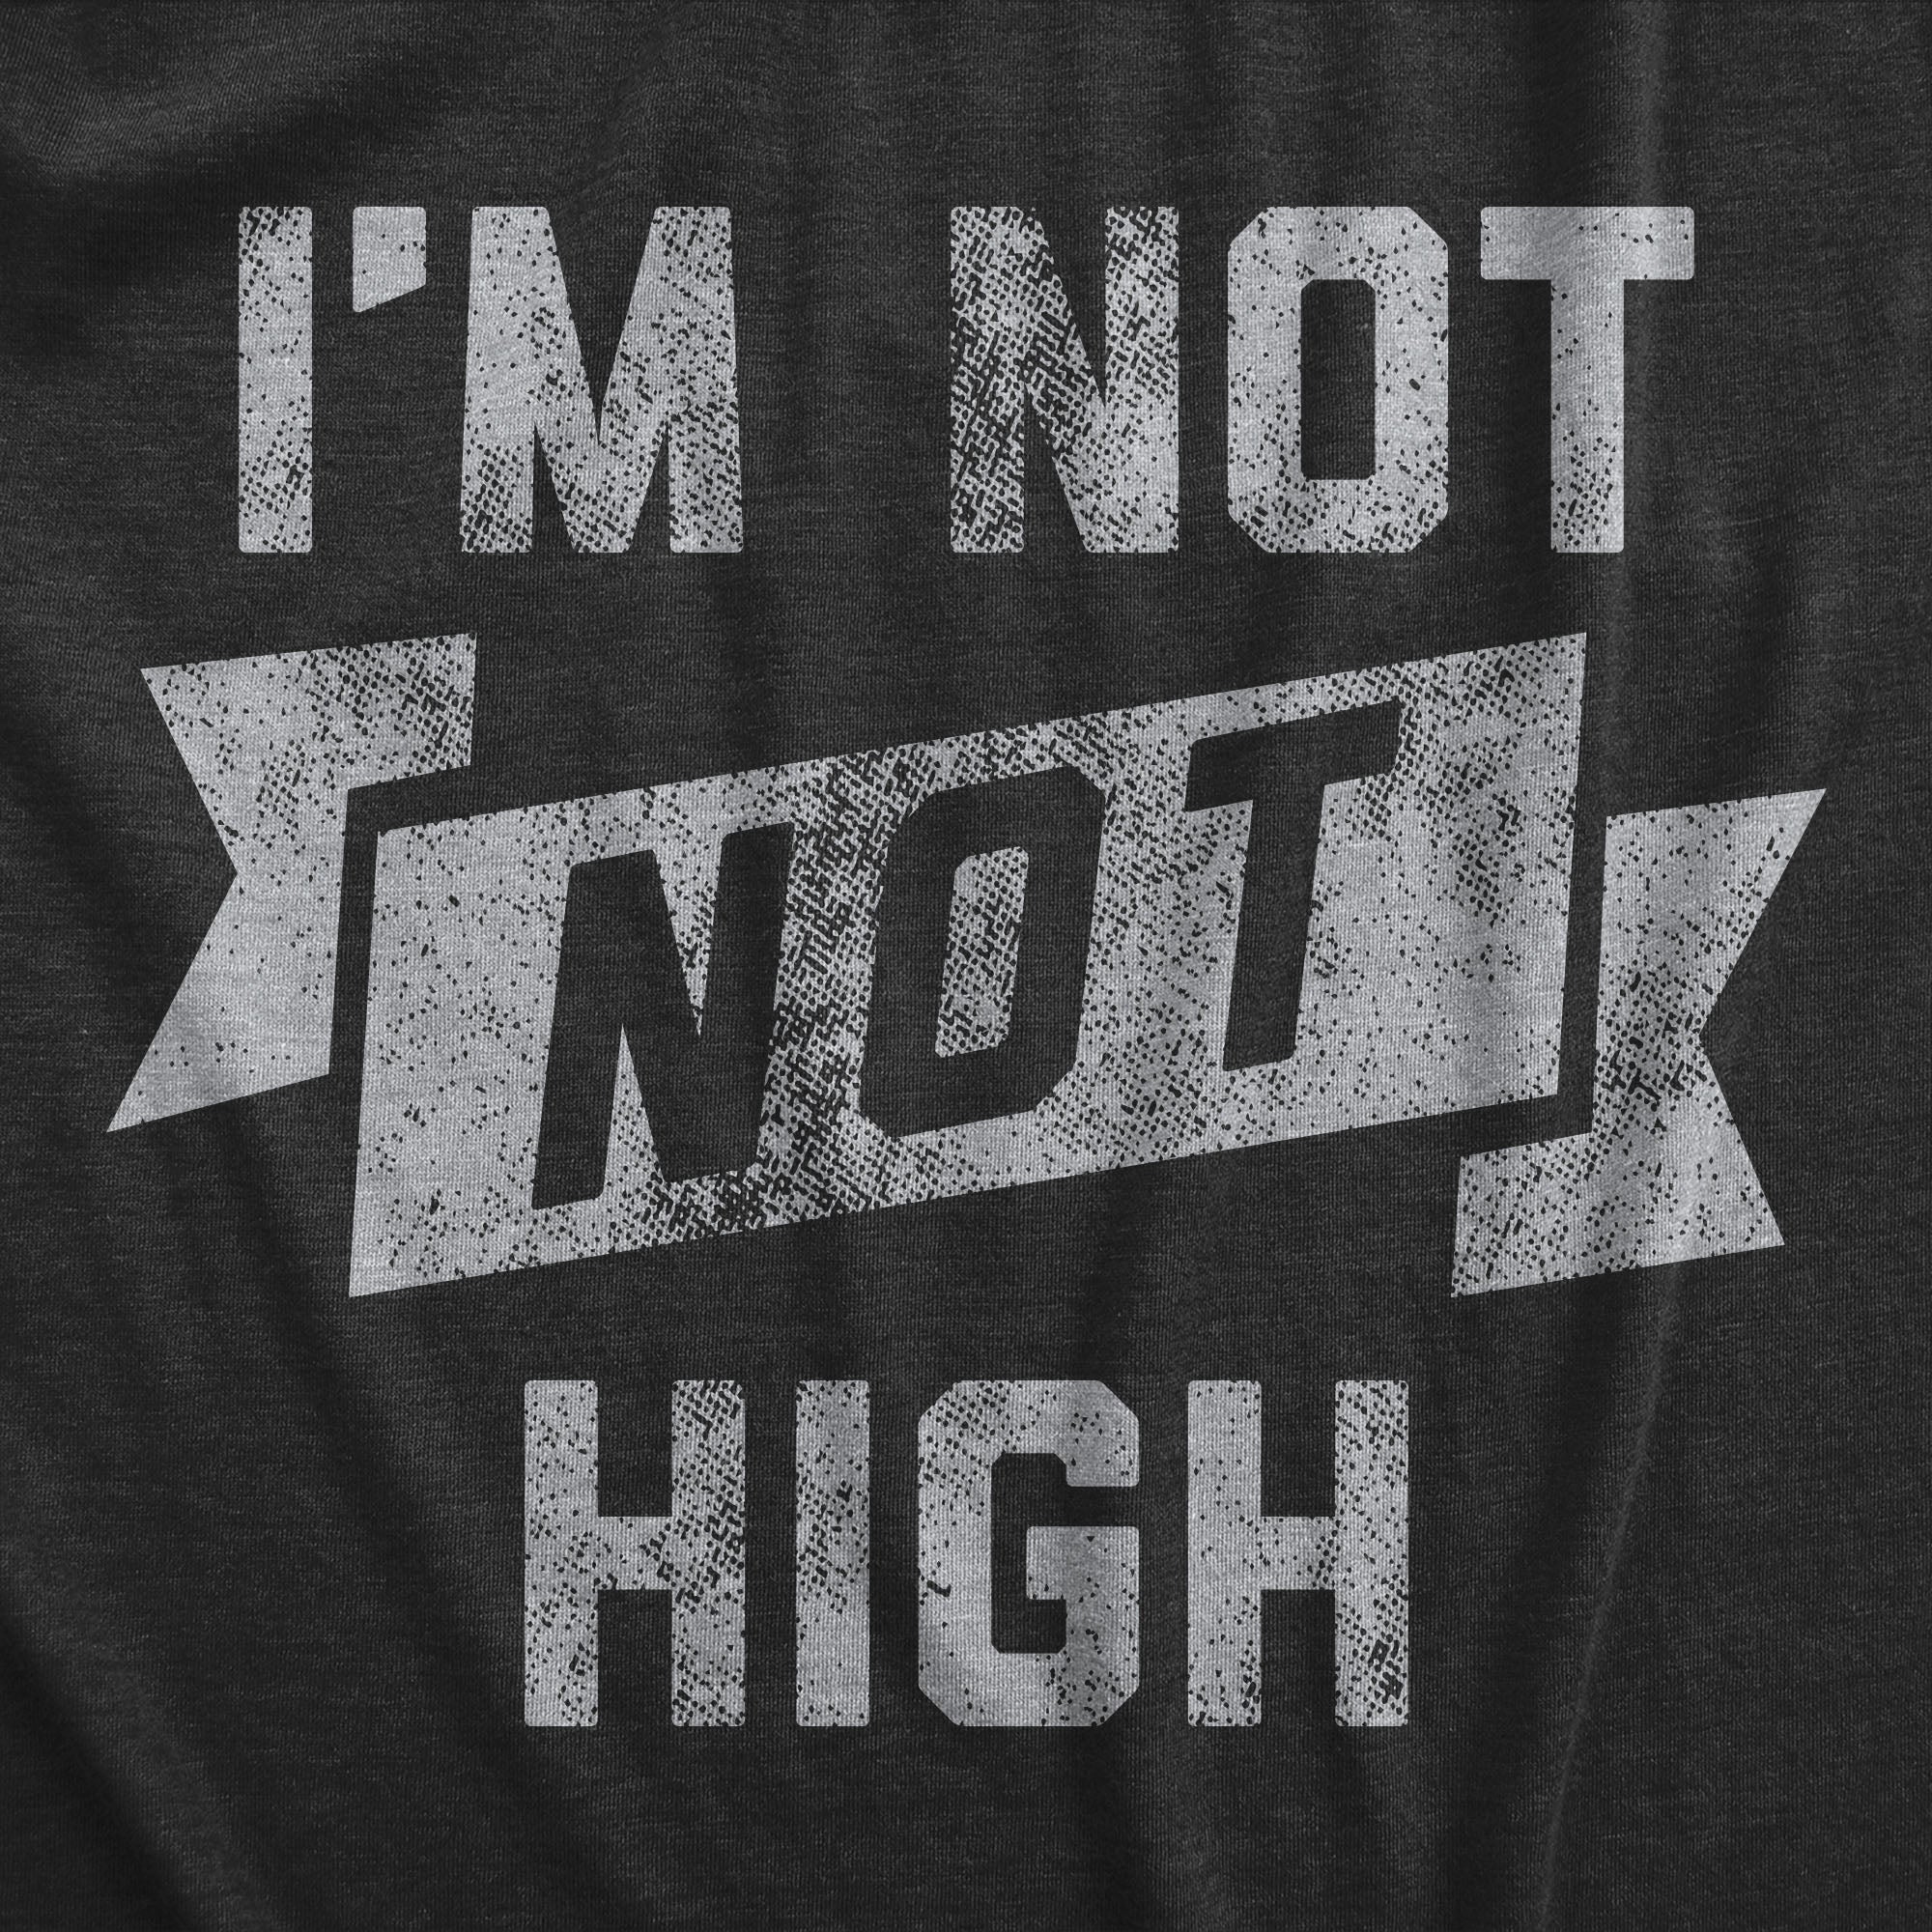 Funny Heather Black - NOTHIGH Im Not Not High Mens T Shirt Nerdy 420 Sarcastic Tee